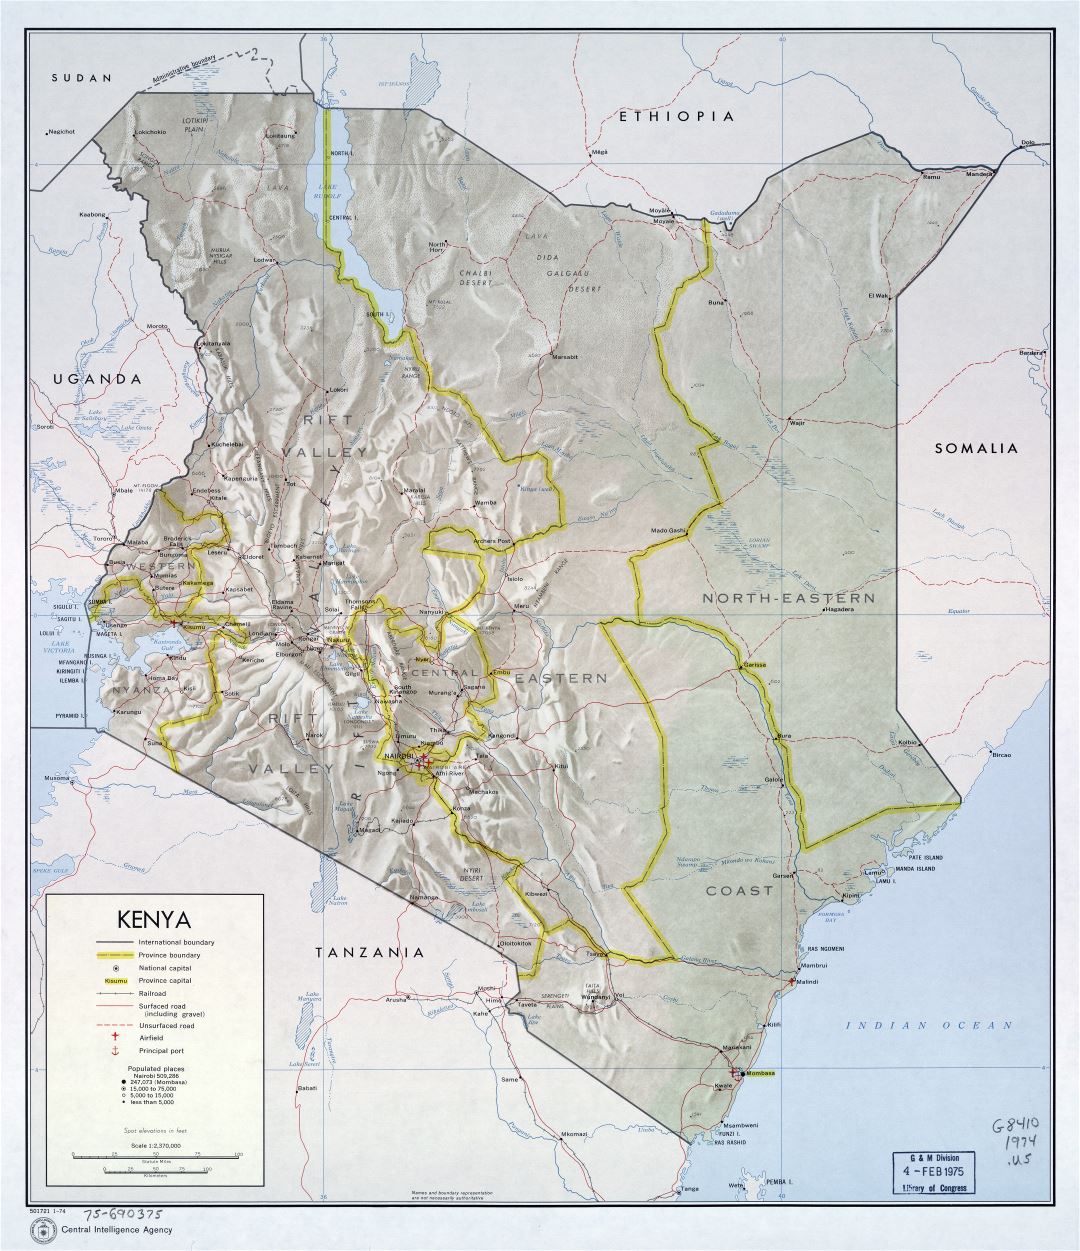 Large scale political and administrative map of Kenya with relief, roads, railroads, cities, ports and airports - 1974